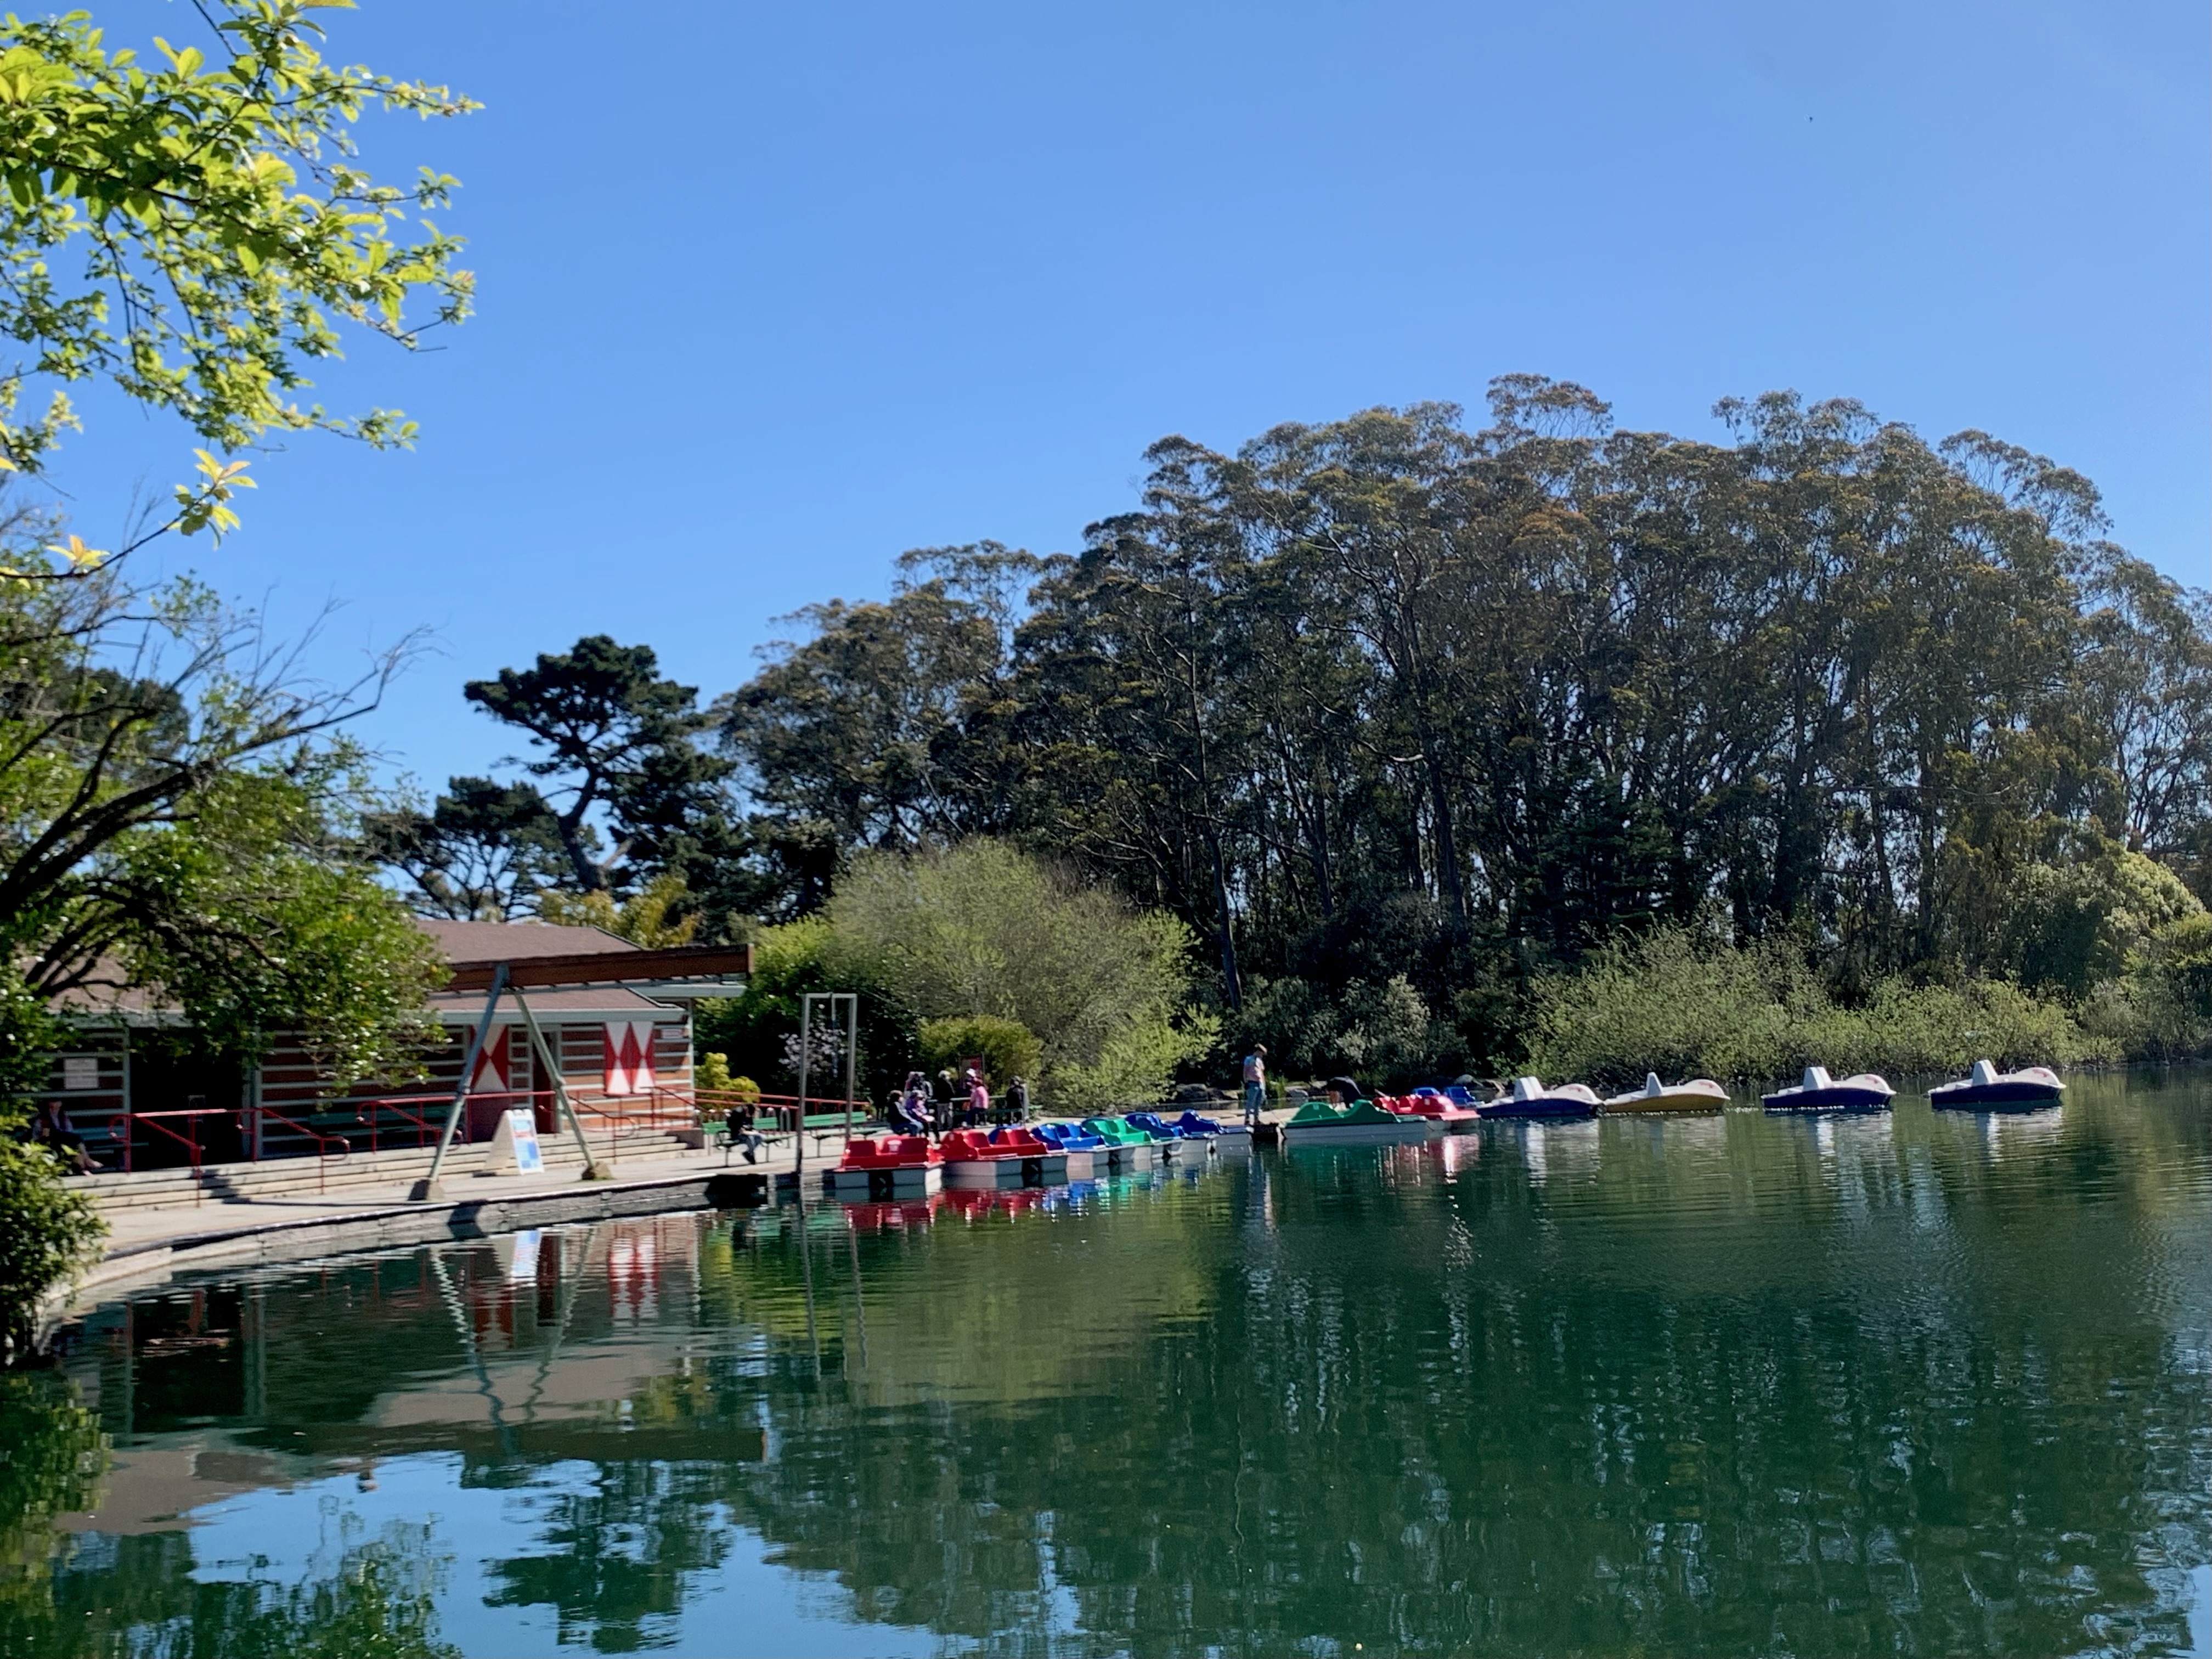 Stow Lake with the boat house and pedal boats